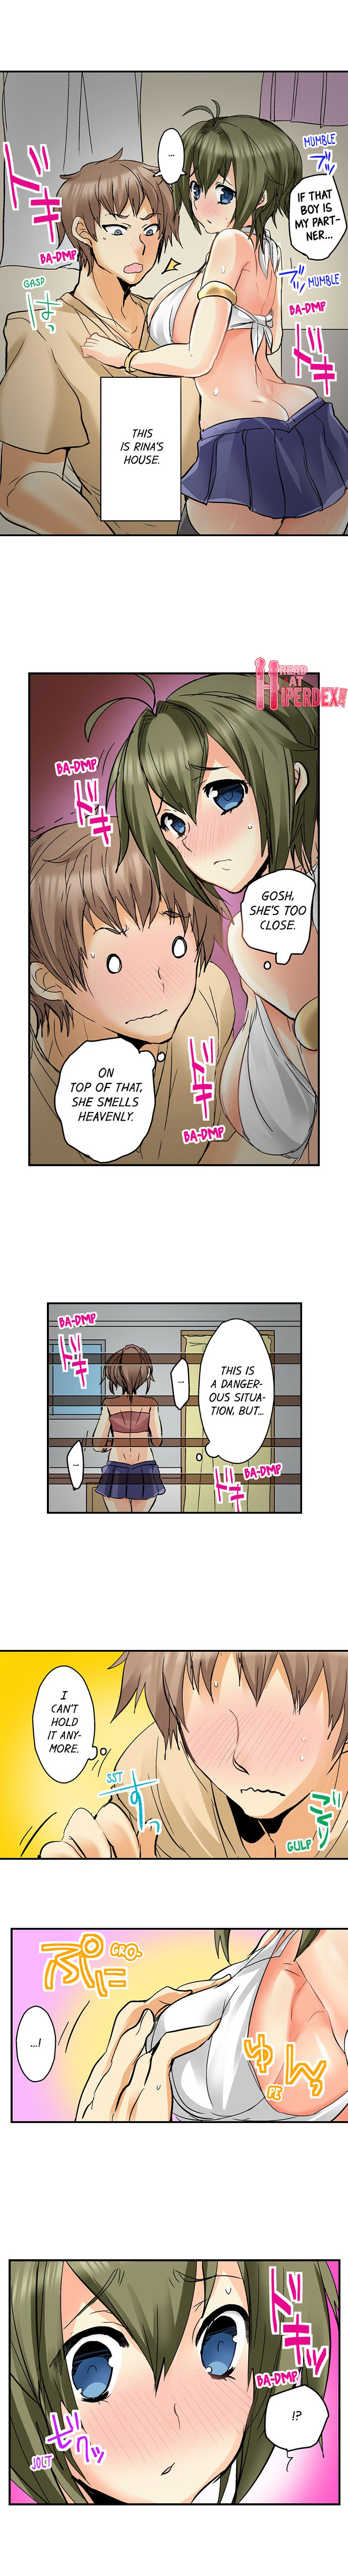 If I Don't Fuck Them, I'll Die - Chapter 4 Page 6